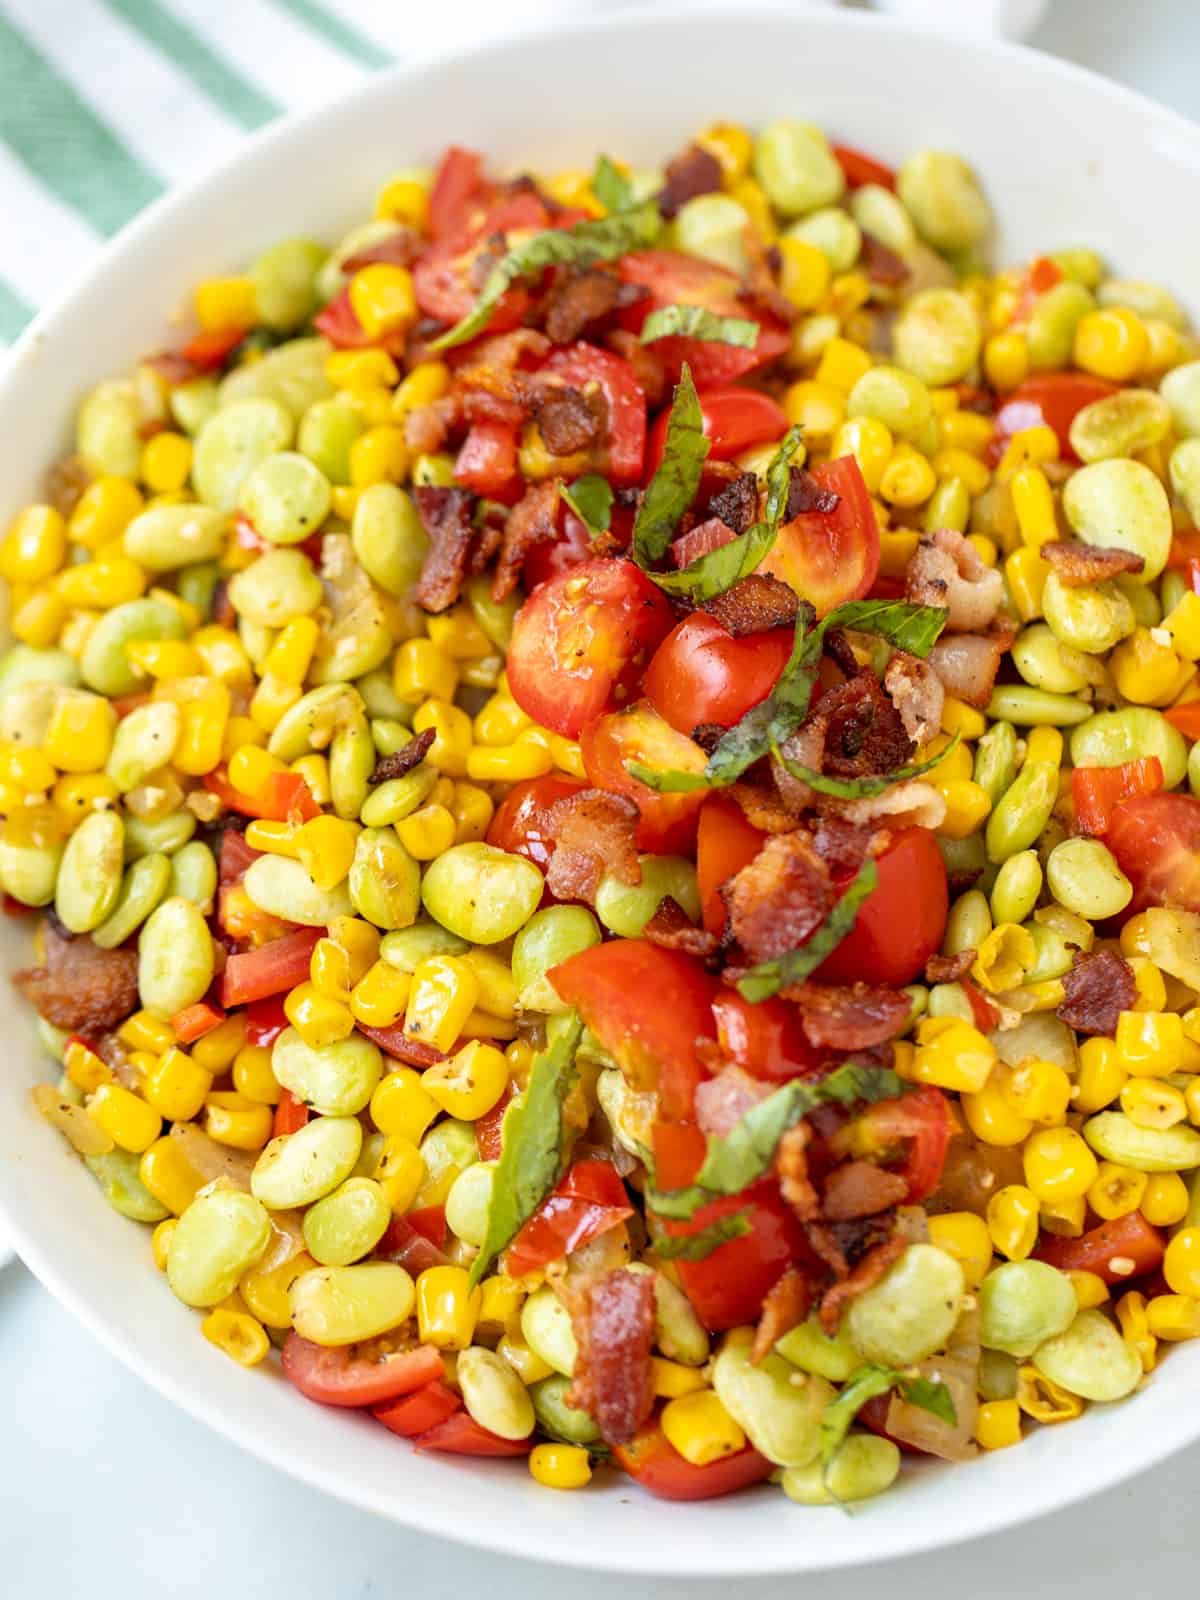 Succotash dished up in white dish with bacon and tomatoes.